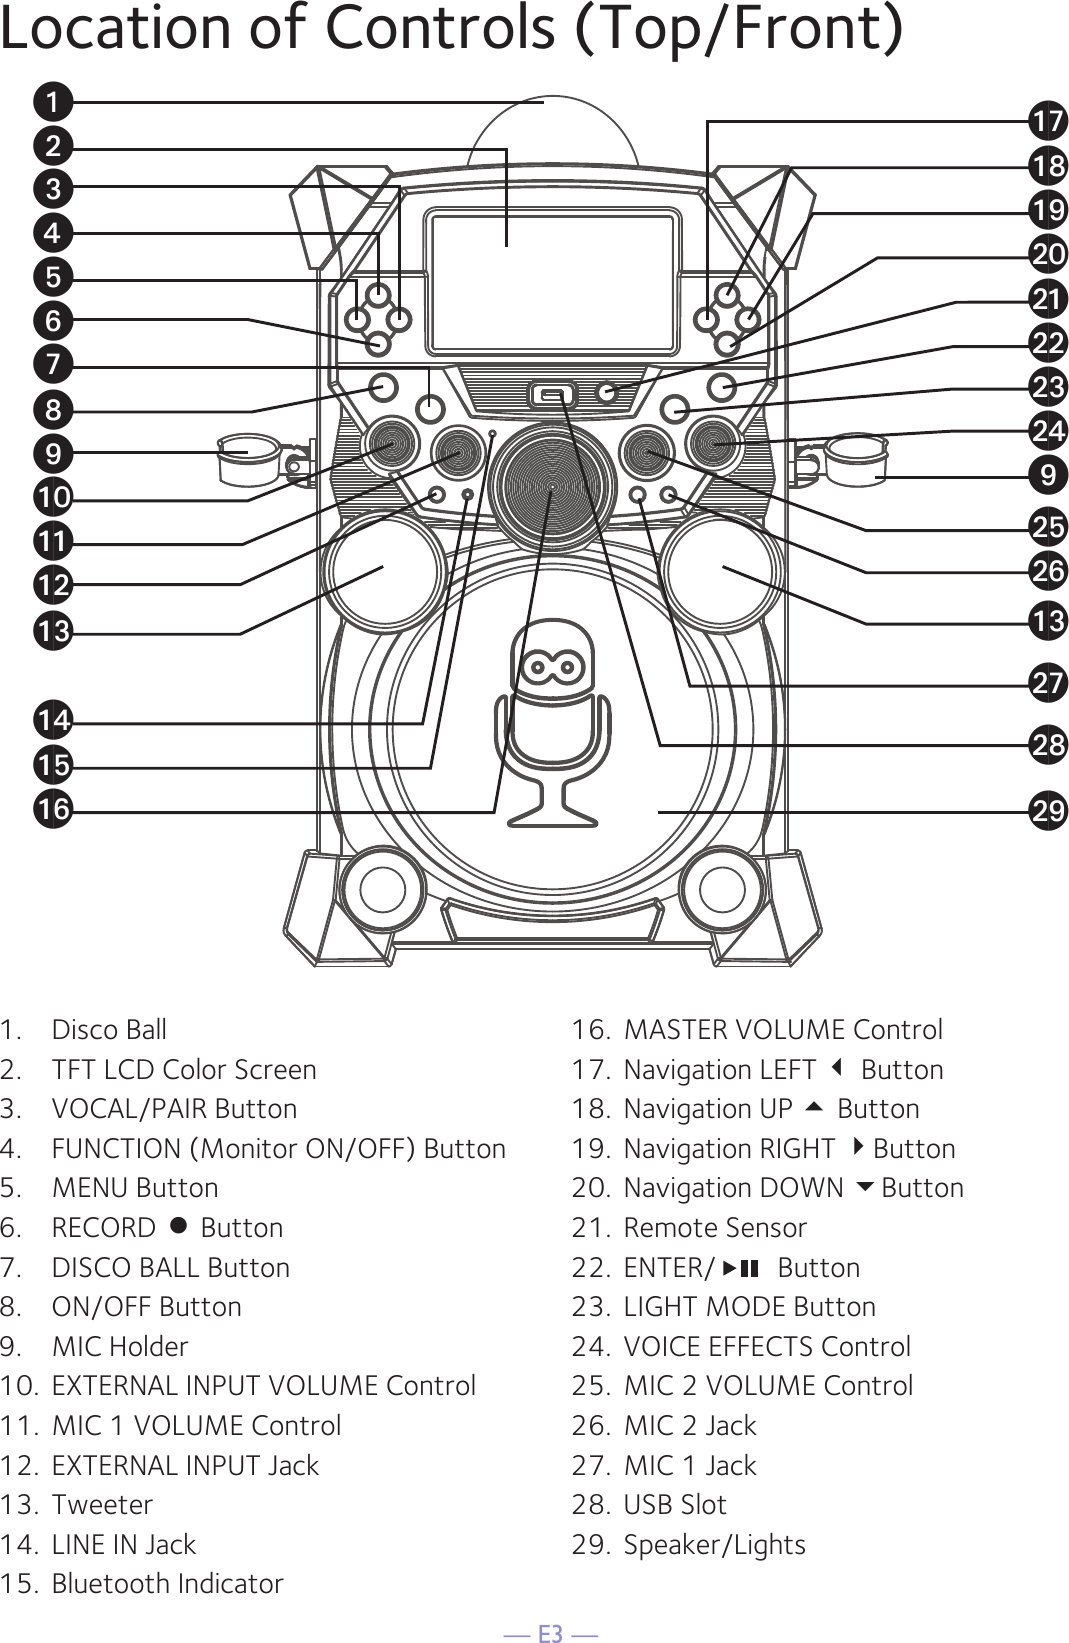 — E3 —Location of Controls (Top/Front)1.  Disco Ball2.  TFT LCD Color Screen3.  VOCAL/PAIR Button4.  FUNCTION (Monitor ON/OFF) Button5.  MENU Button 6.  RECORD   Button7.  DISCO BALL Button 8.  ON/OFF Button 9.  MIC Holder 10.  EXTERNAL INPUT VOLUME Control11.  MIC 1 VOLUME Control12.  EXTERNAL INPUT Jack13.  Tweeter 14.  LINE IN Jack15.  Bluetooth Indicator16.  MASTER VOLUME Control 17.  Navigation LEFT  Button18.  Navigation UP  Button19.  Navigation RIGHT Button20.  Navigation DOWN Button 21.  Remote Sensor 22.  ENTER/   Button23.  LIGHT MODE Button24.  VOICE EFFECTS Control25.  MIC 2 VOLUME Control26.  MIC 2 Jack 27.  MIC 1 Jack28.  USB Slot 29.  Speaker/LightsuxValvyatWam amwUakXXanaqbtbmbraoarbkbpbnbsapasblbqbo